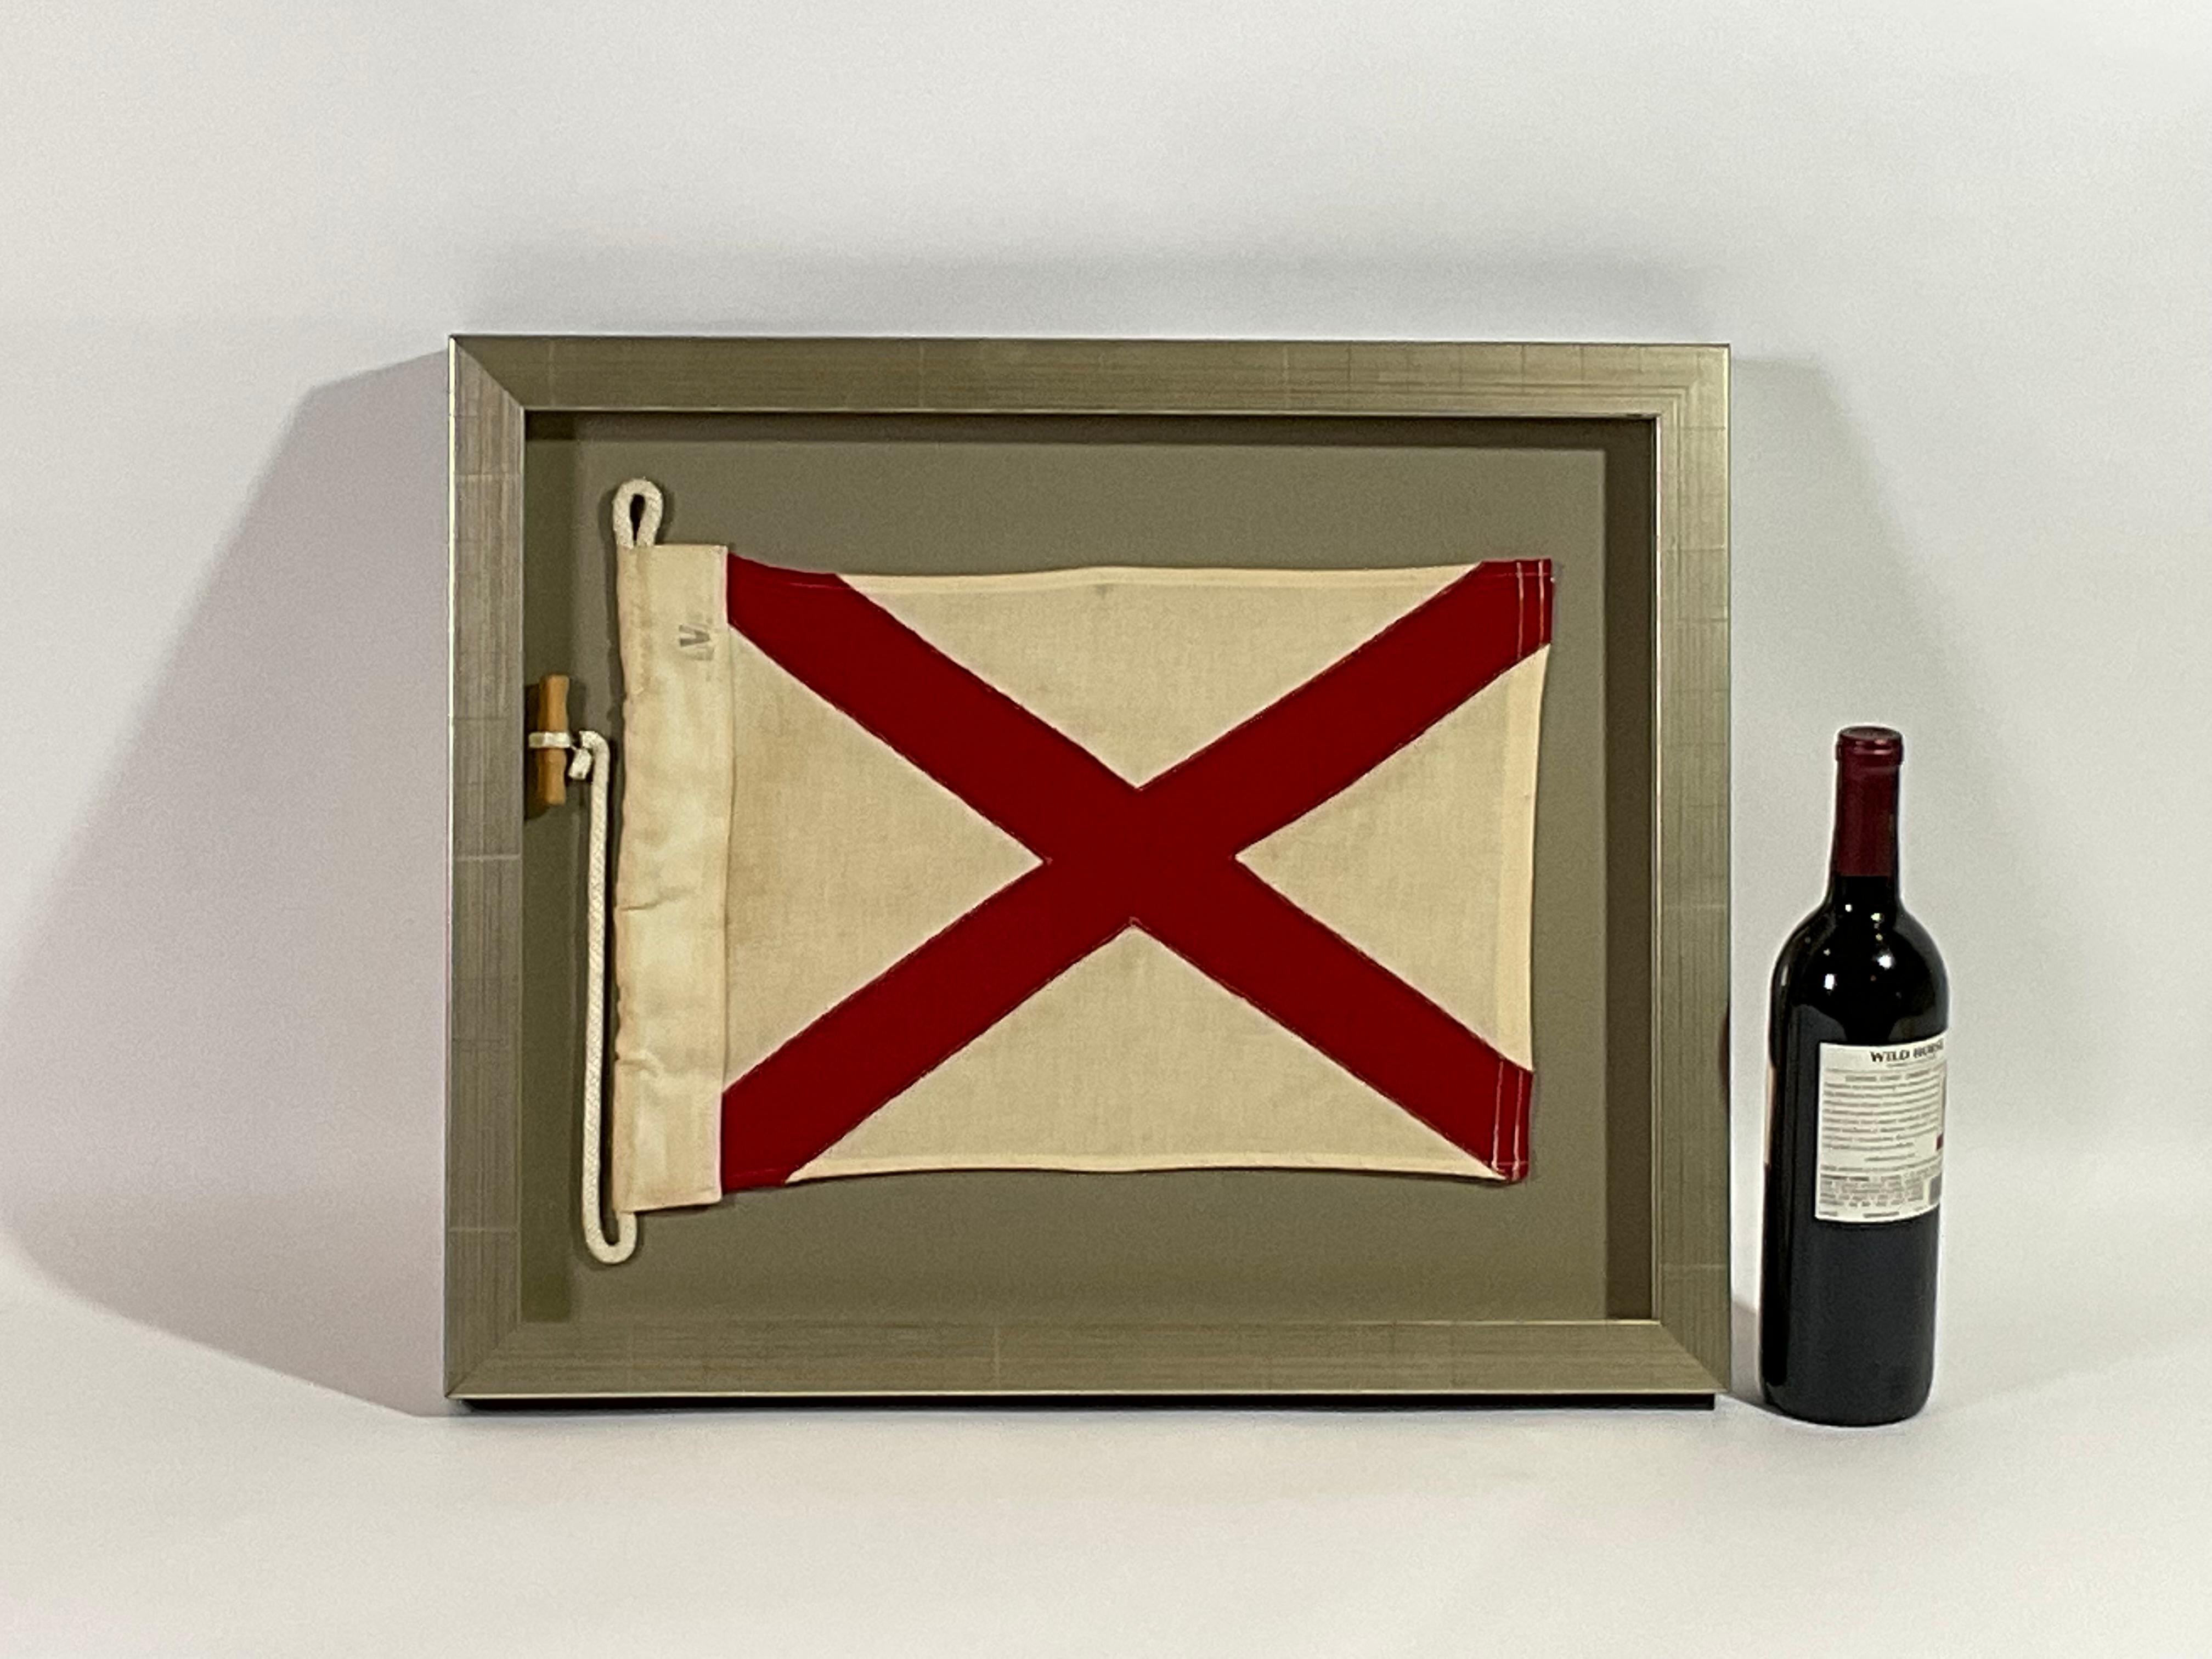 Framed maritime signal flag representing the letter “V” in the international code of signals.  This authentic and ocean used pennant is made of individual panels of red and white cotton. Fitted to a heavy canvas hoist band with original rope and